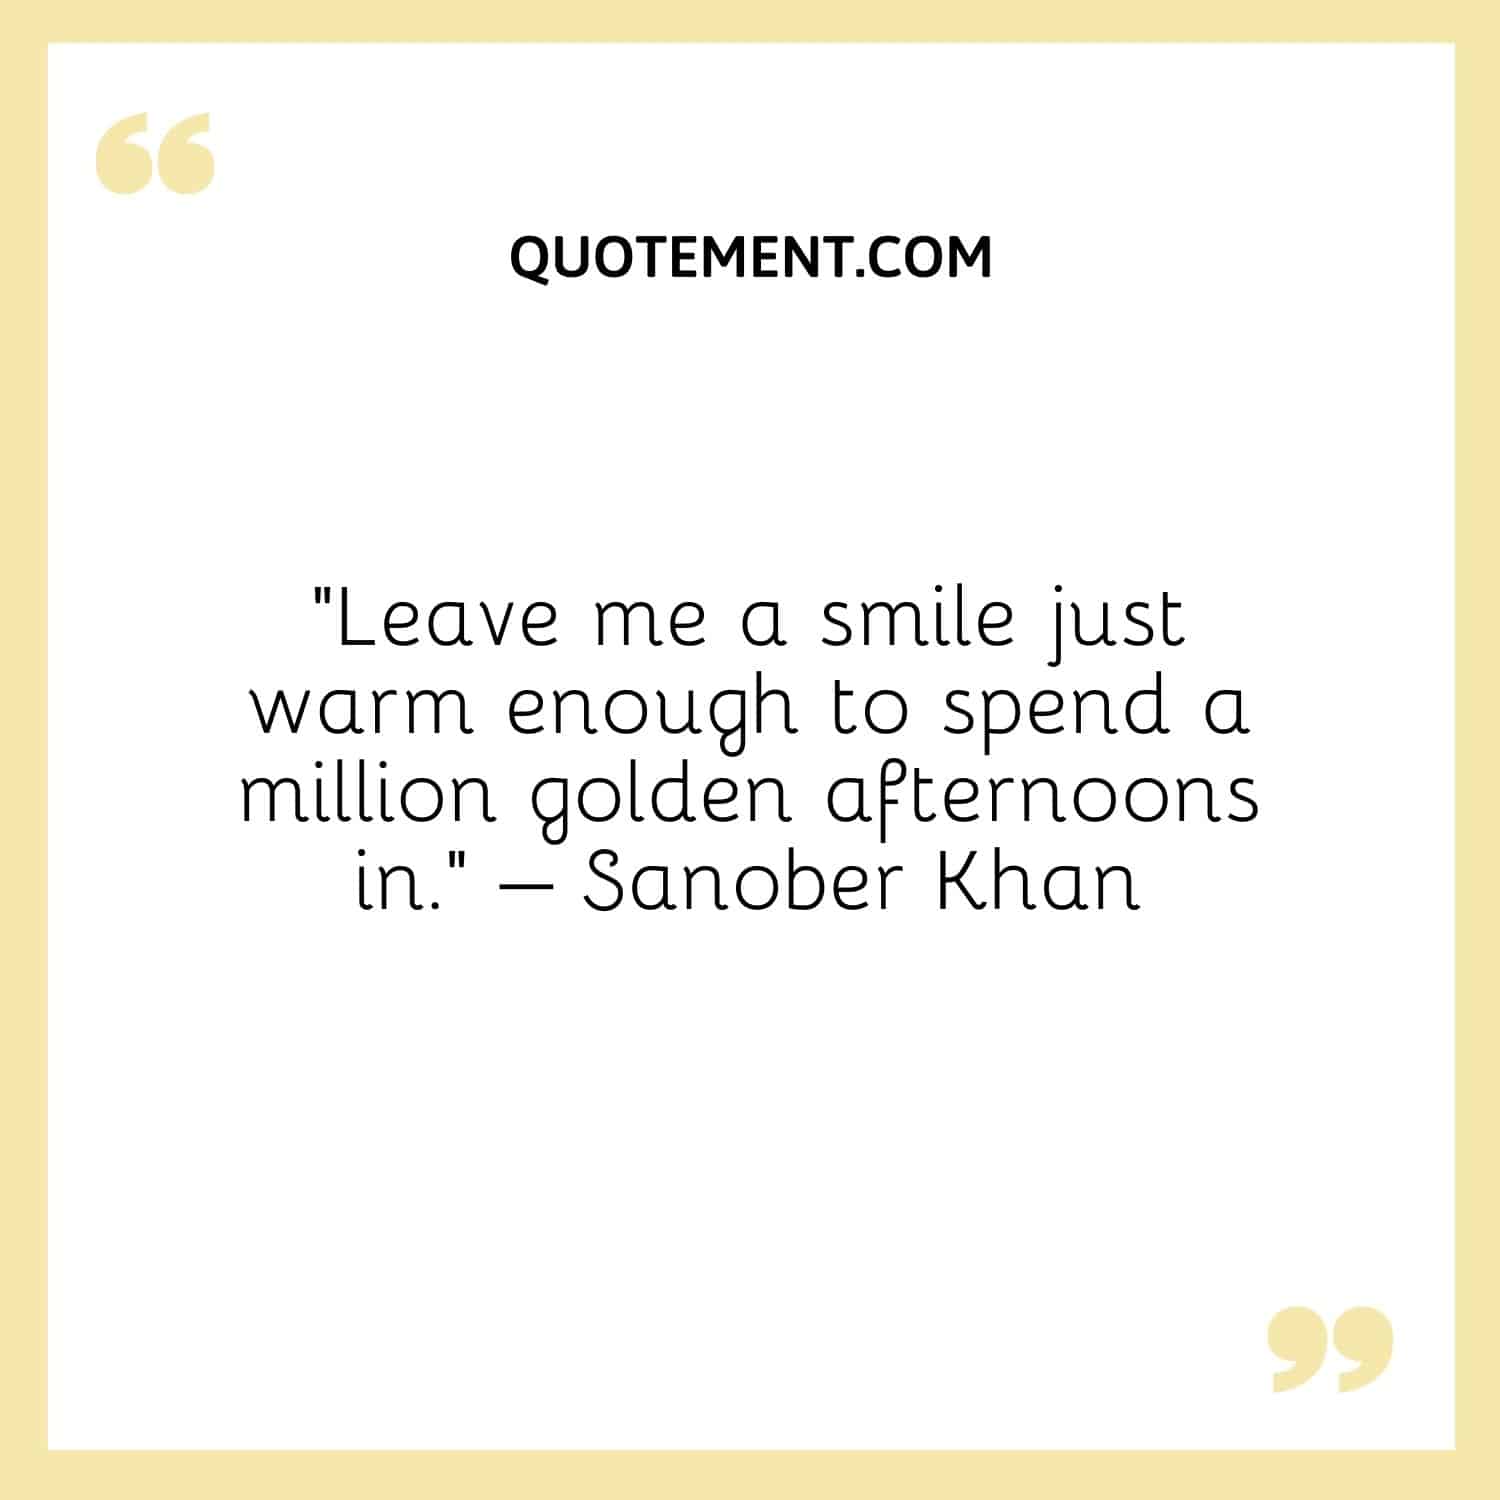 Leave me a smile just warm enough to spend a million golden afternoons in. – Sanober Khan